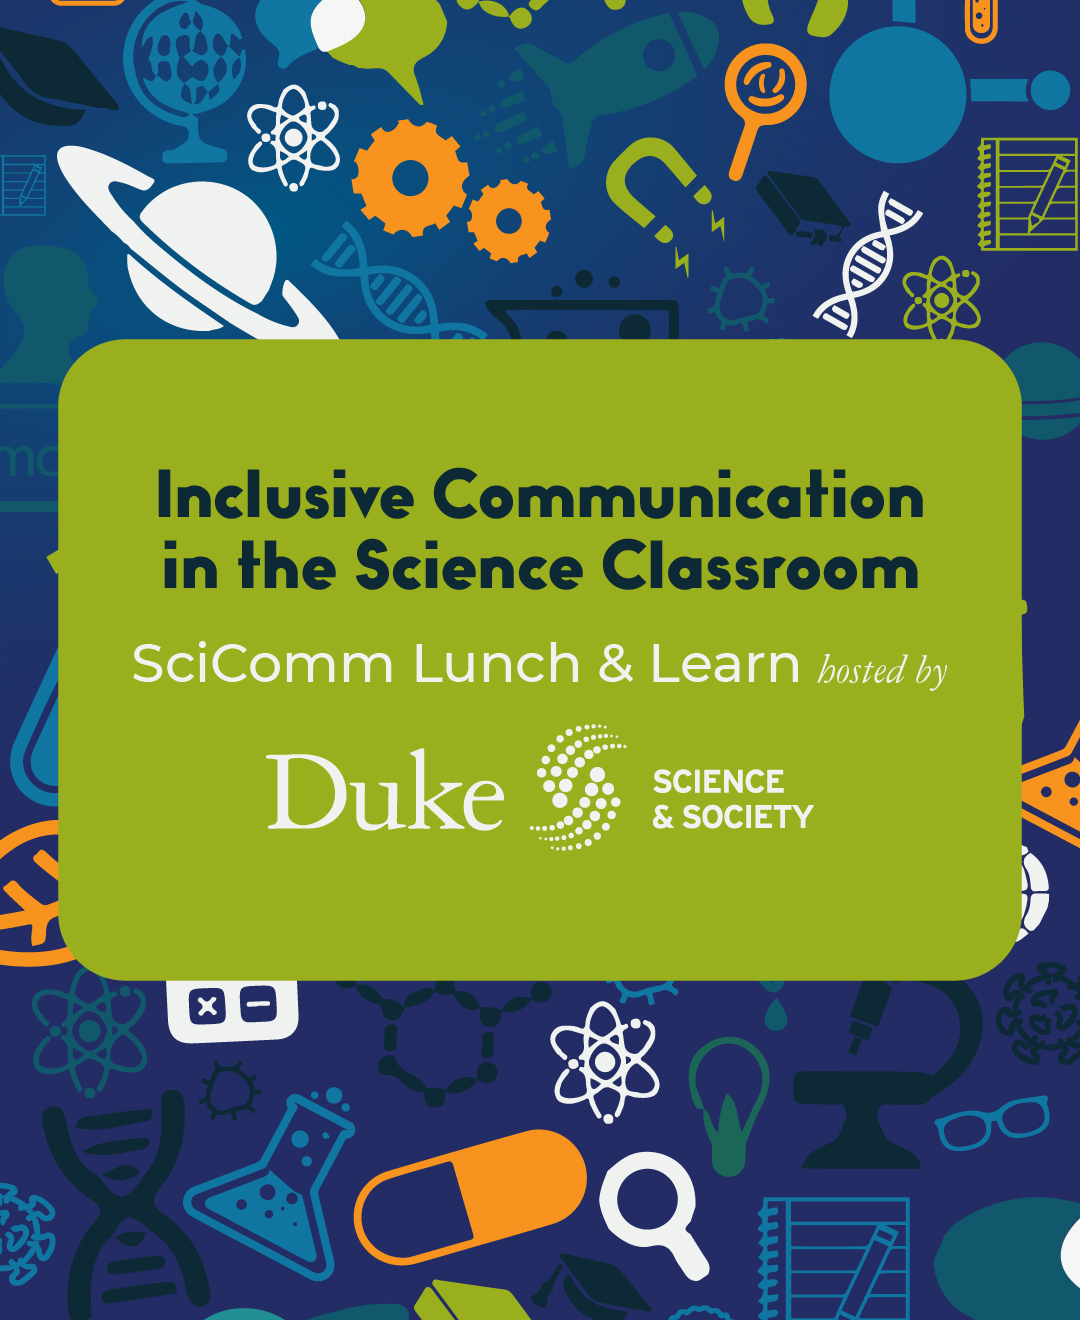 Inclusive Communication in the Science Classroom